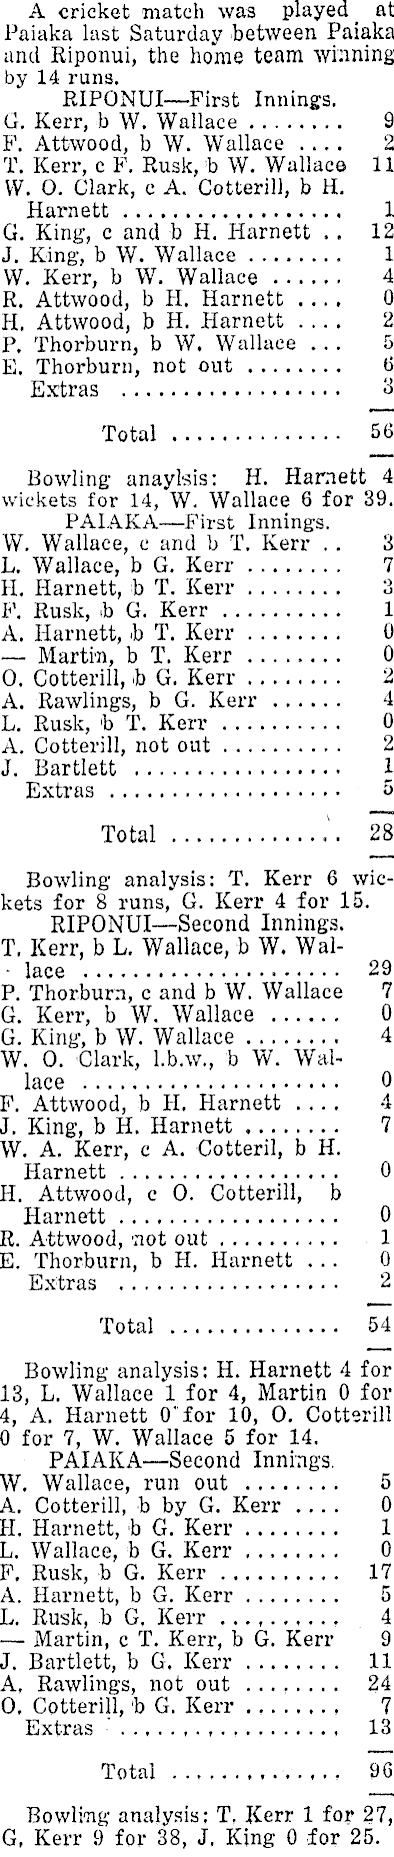 Papers Past Newspapers Northern Advocate 10 April 1919 Cricket